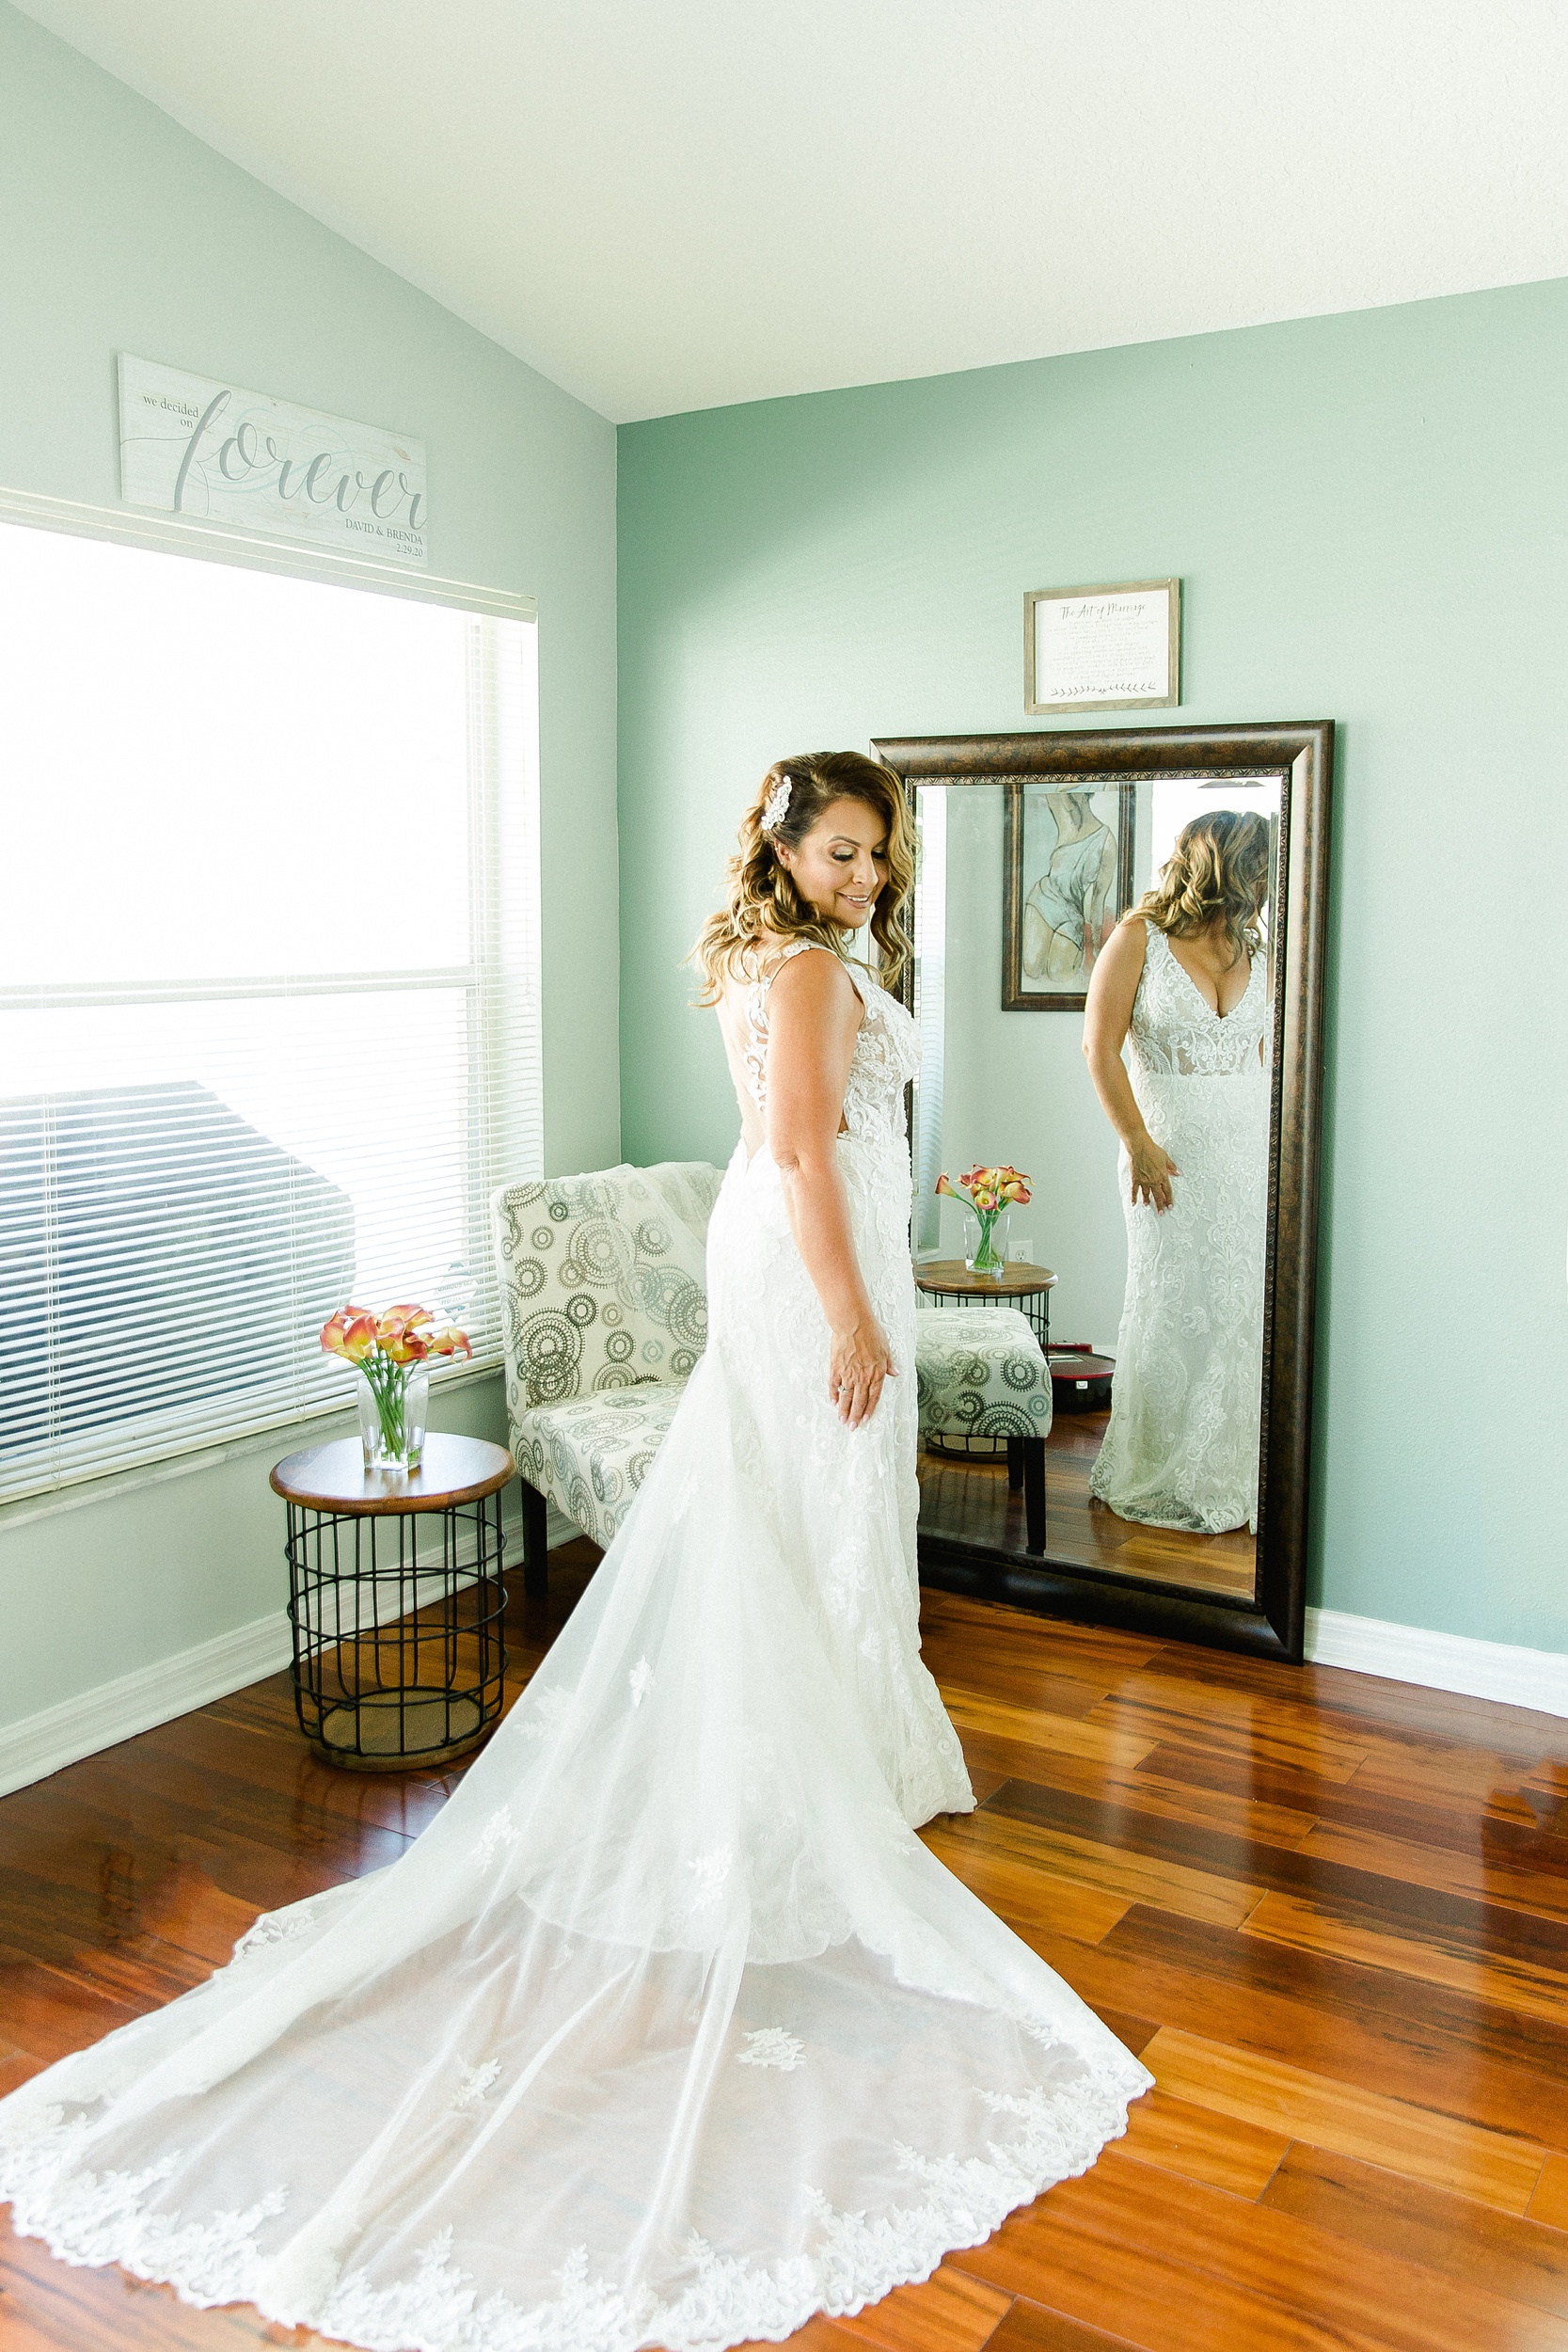 Tampa Wedding Photographer | © Ailyn La Torre Photography 2020